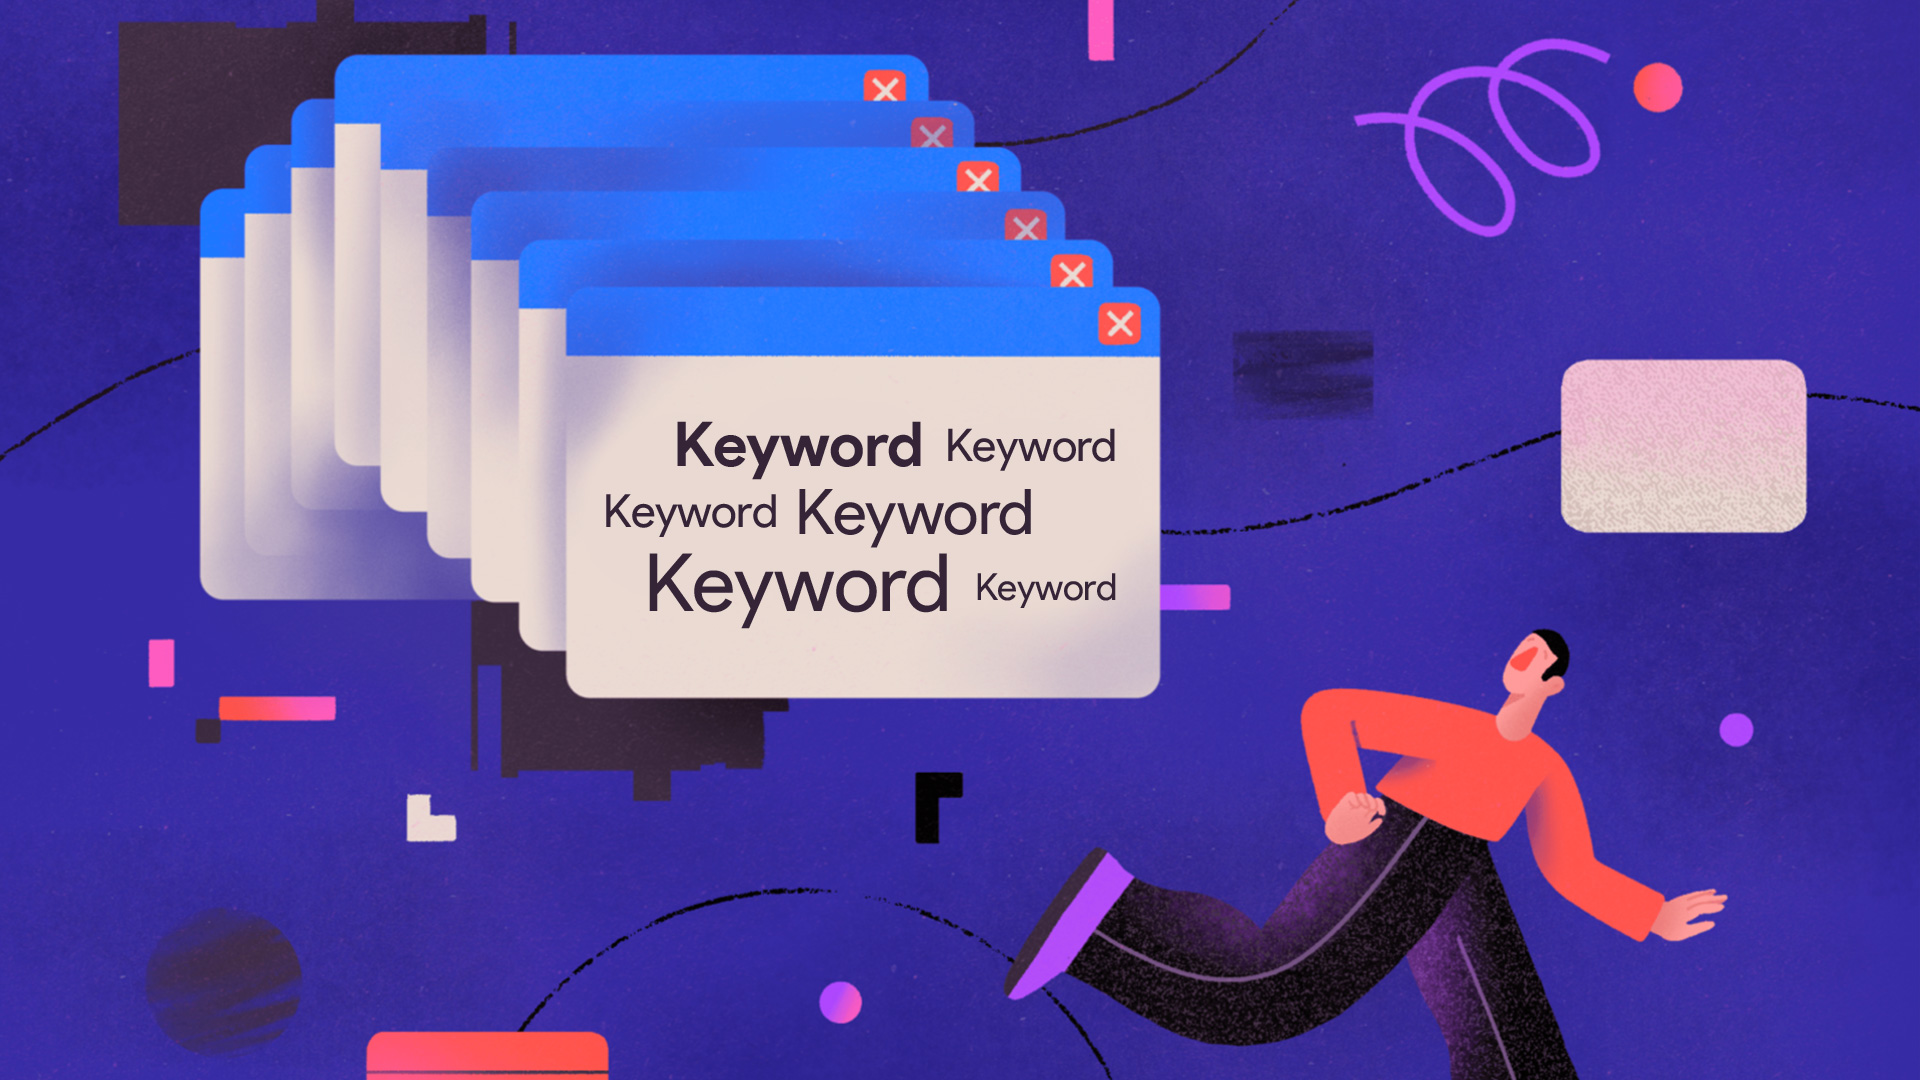 What impact does keyword repetition have on SEO